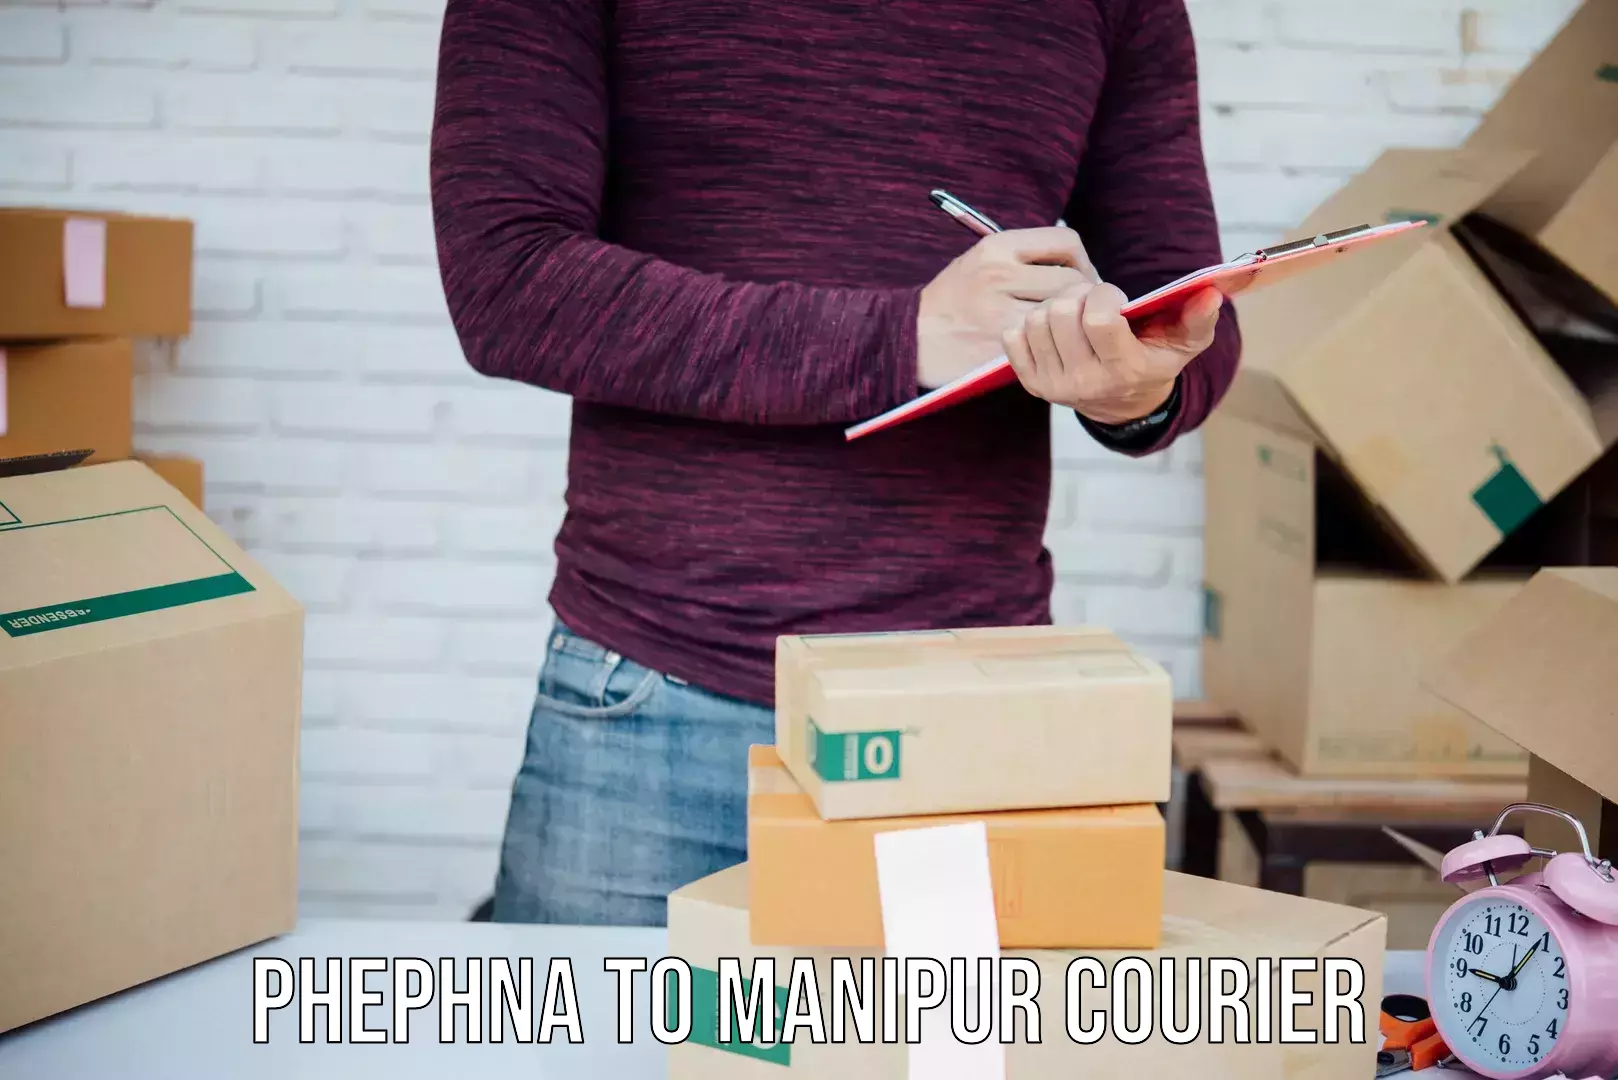 Express postal services Phephna to Manipur